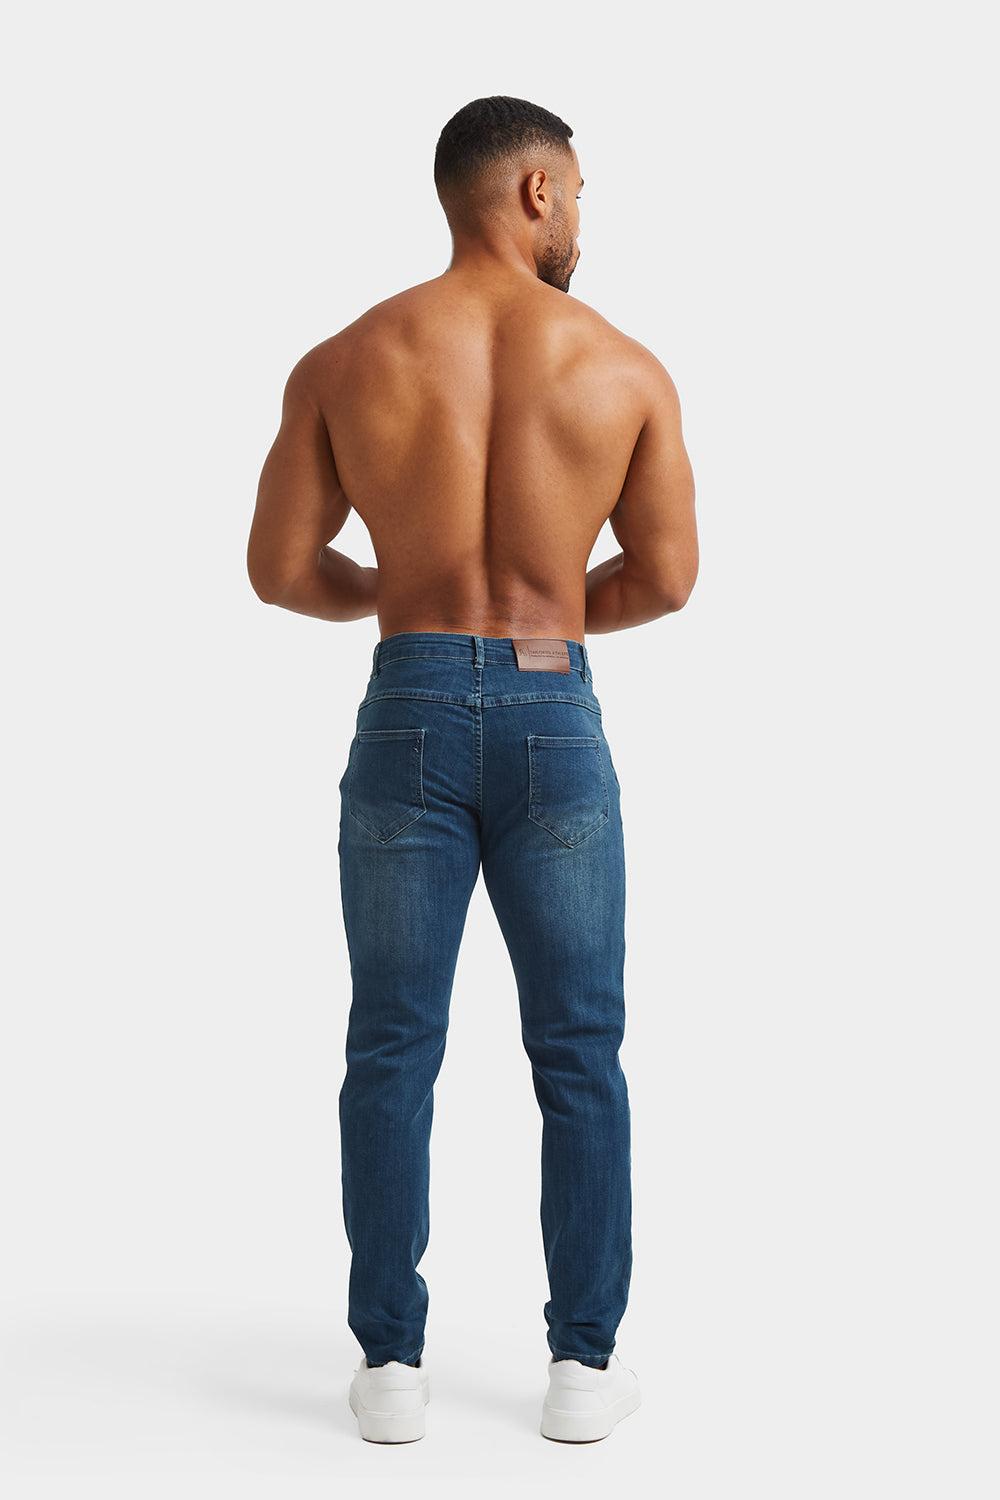 Athletic Fit Jeans in Mid Blue - TAILORED ATHLETE - USA